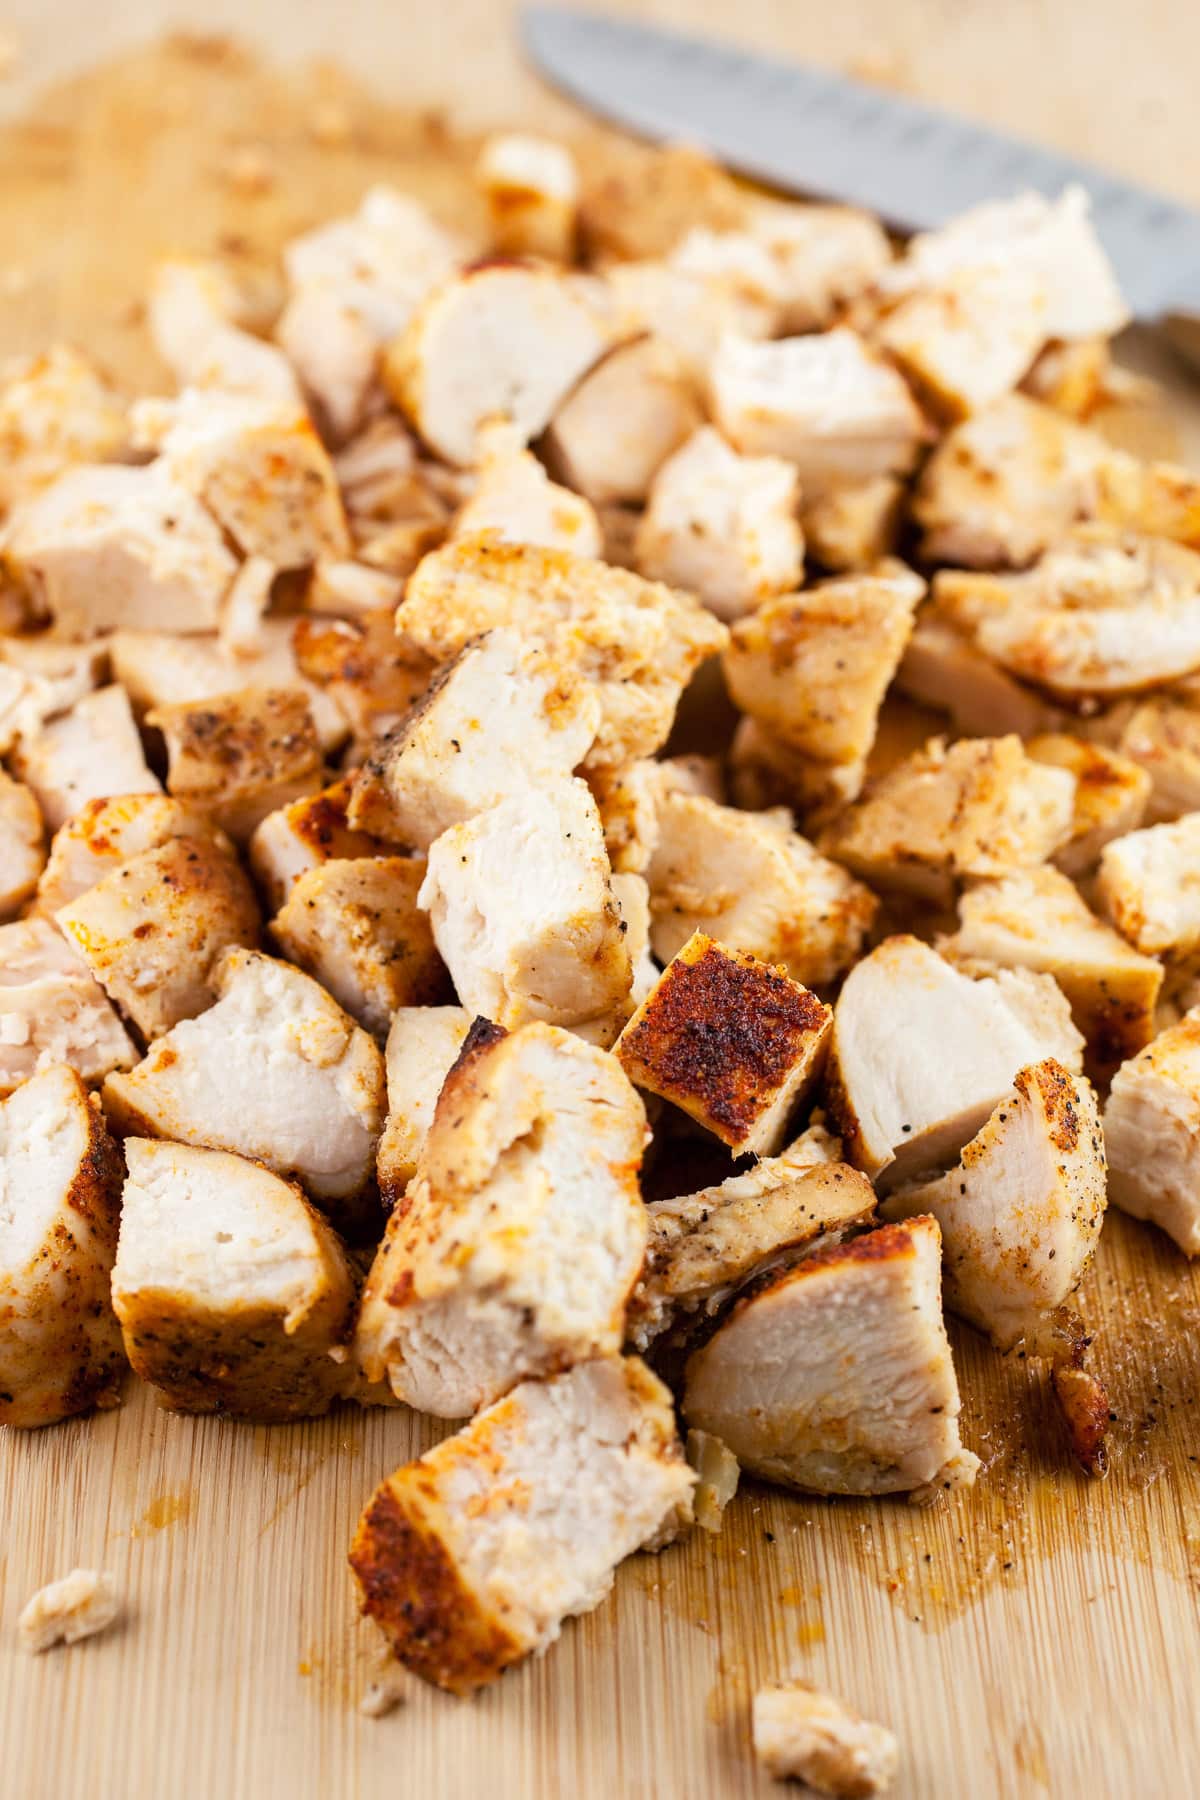 Diced roasted chicken breasts on wooden cutting board.